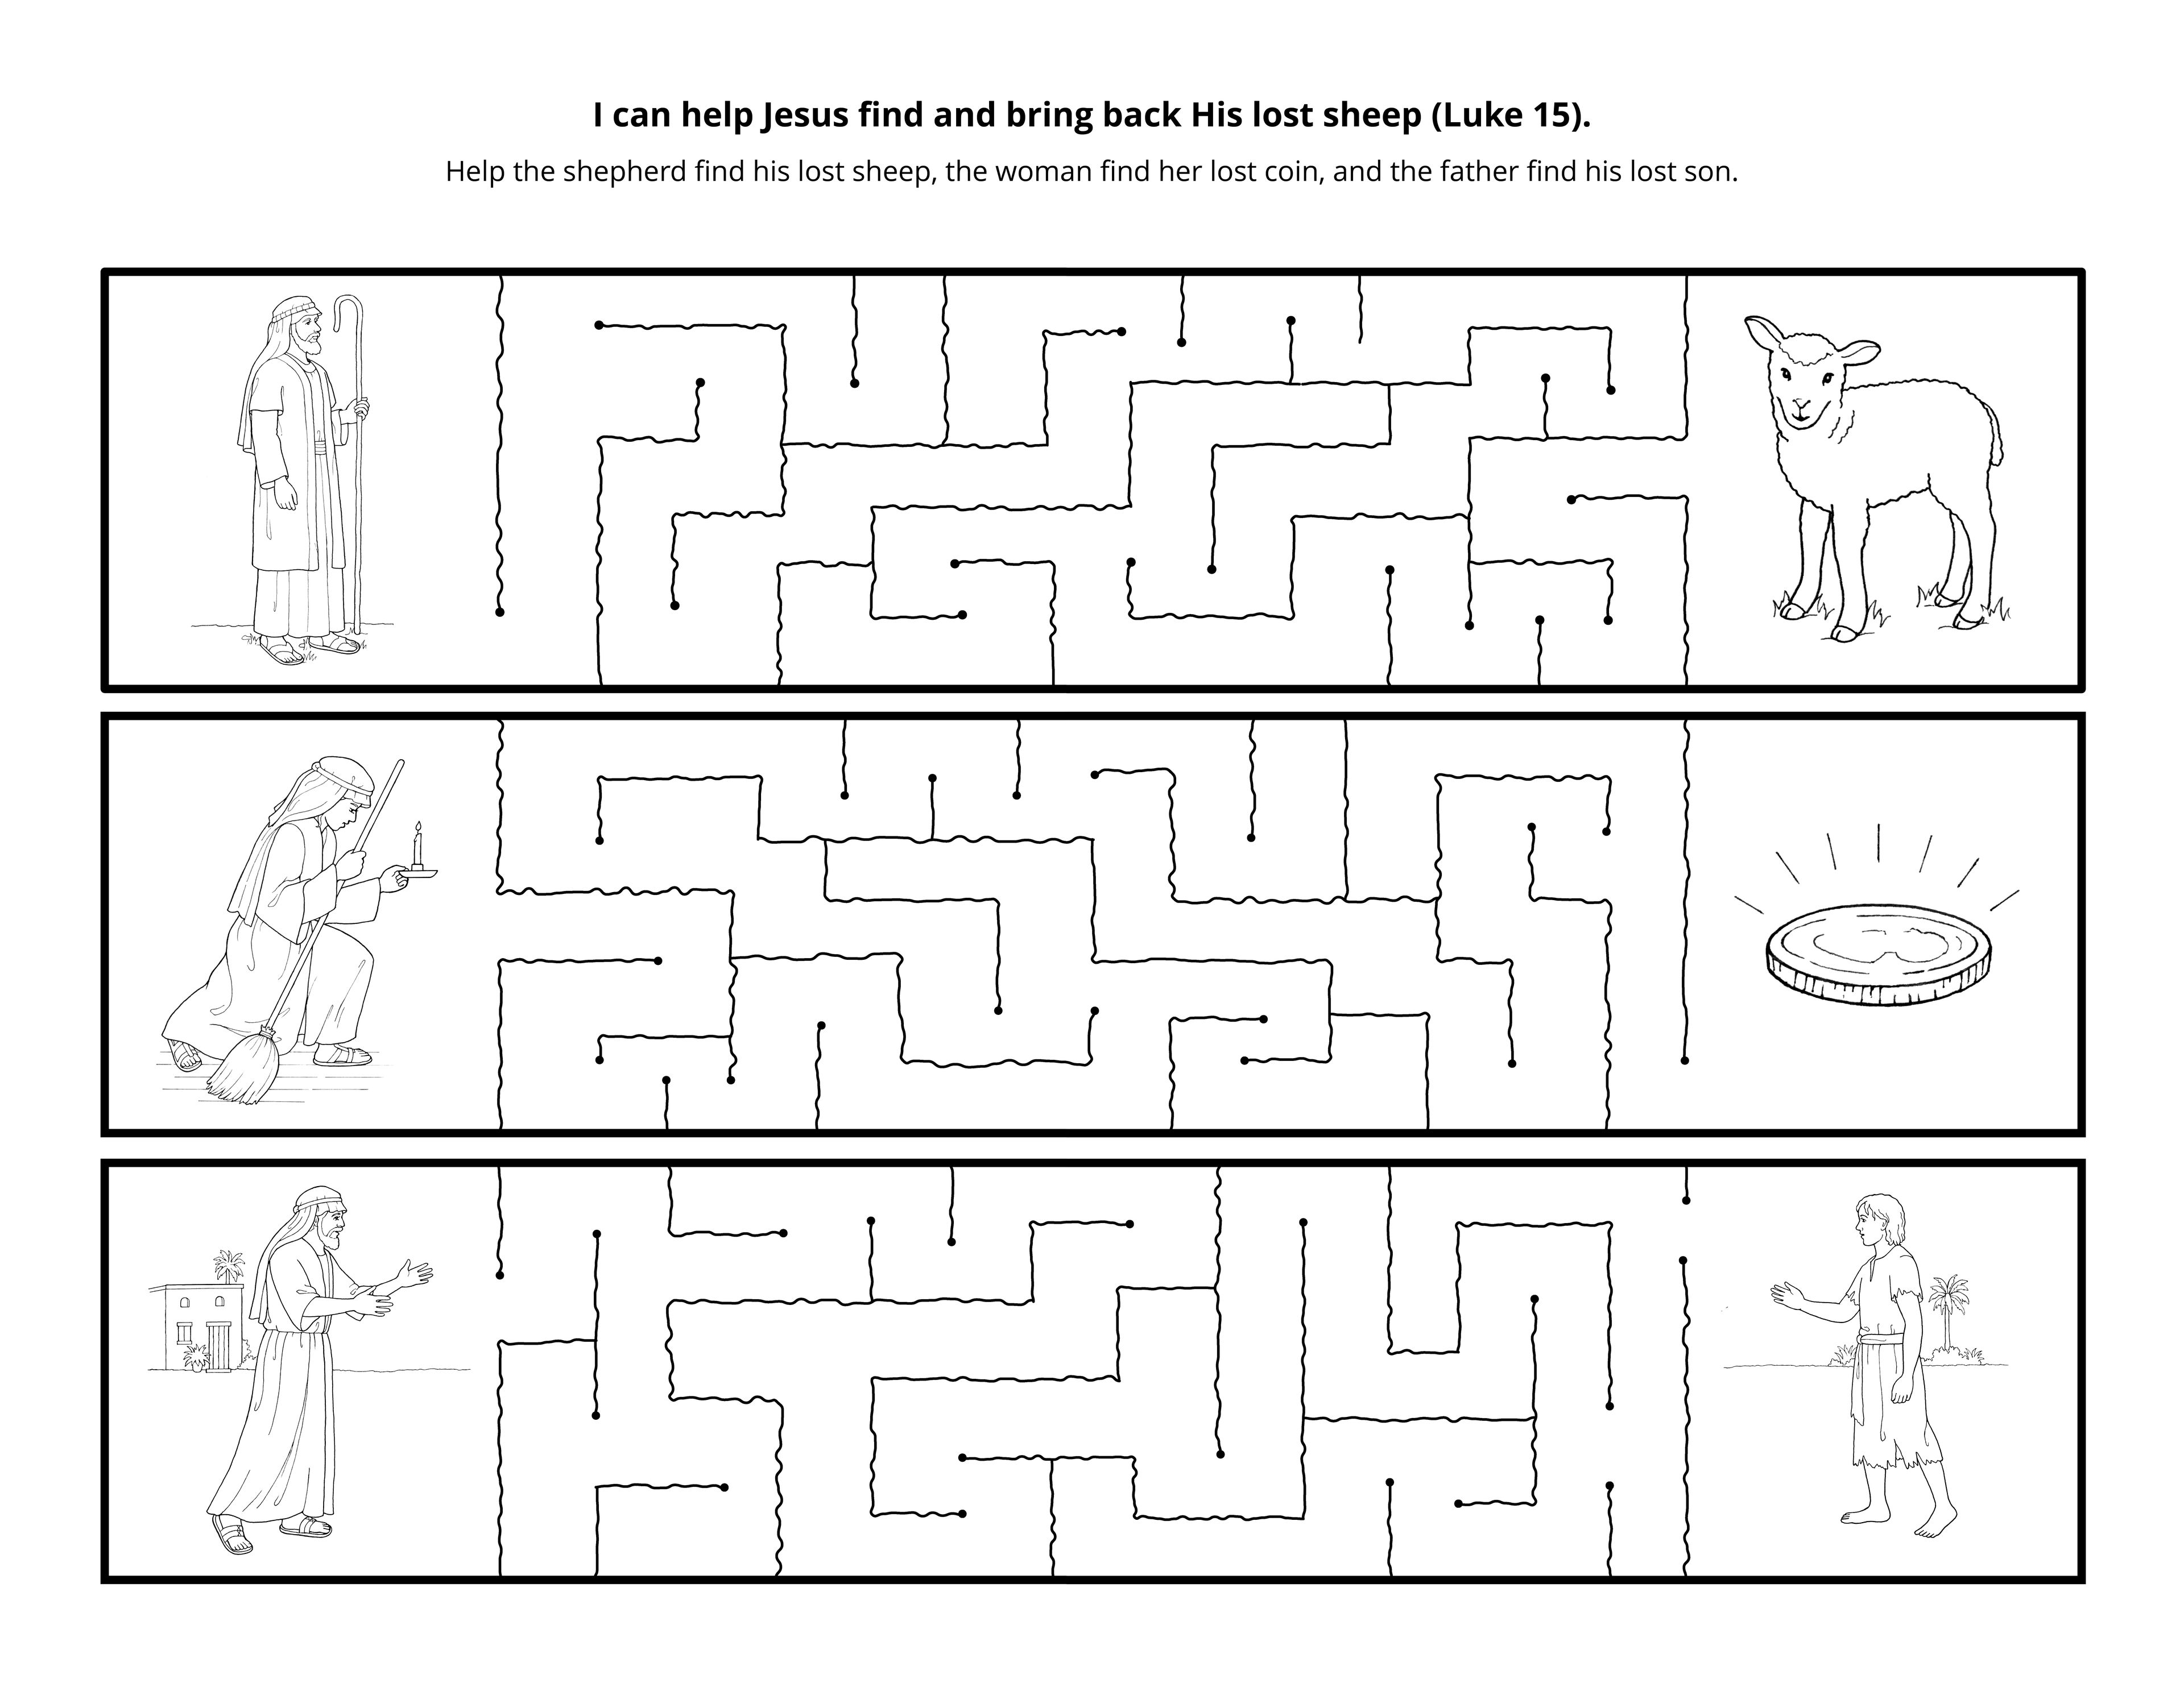 A maze depicting parables from Christ, including the lost sheep, the lost coin, and the prodigal son.